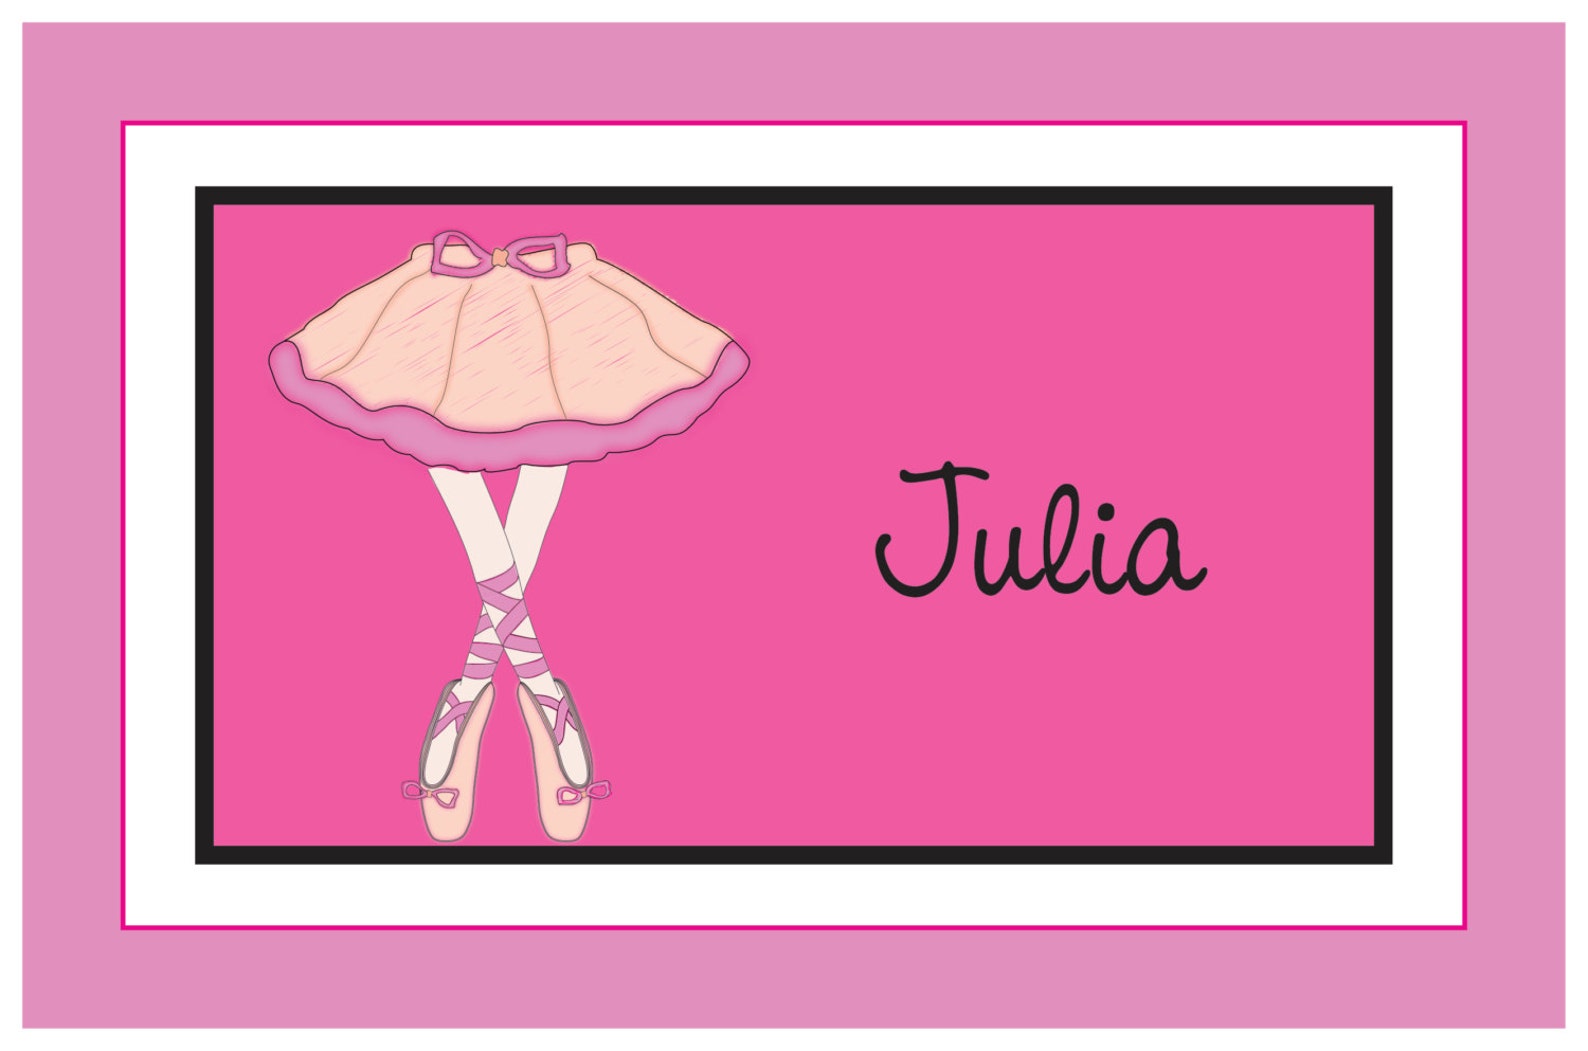 ballerina personalized placemat, ballerina dancing custom placemat, custom girl ballet theme placemat, first birthday gift, todd